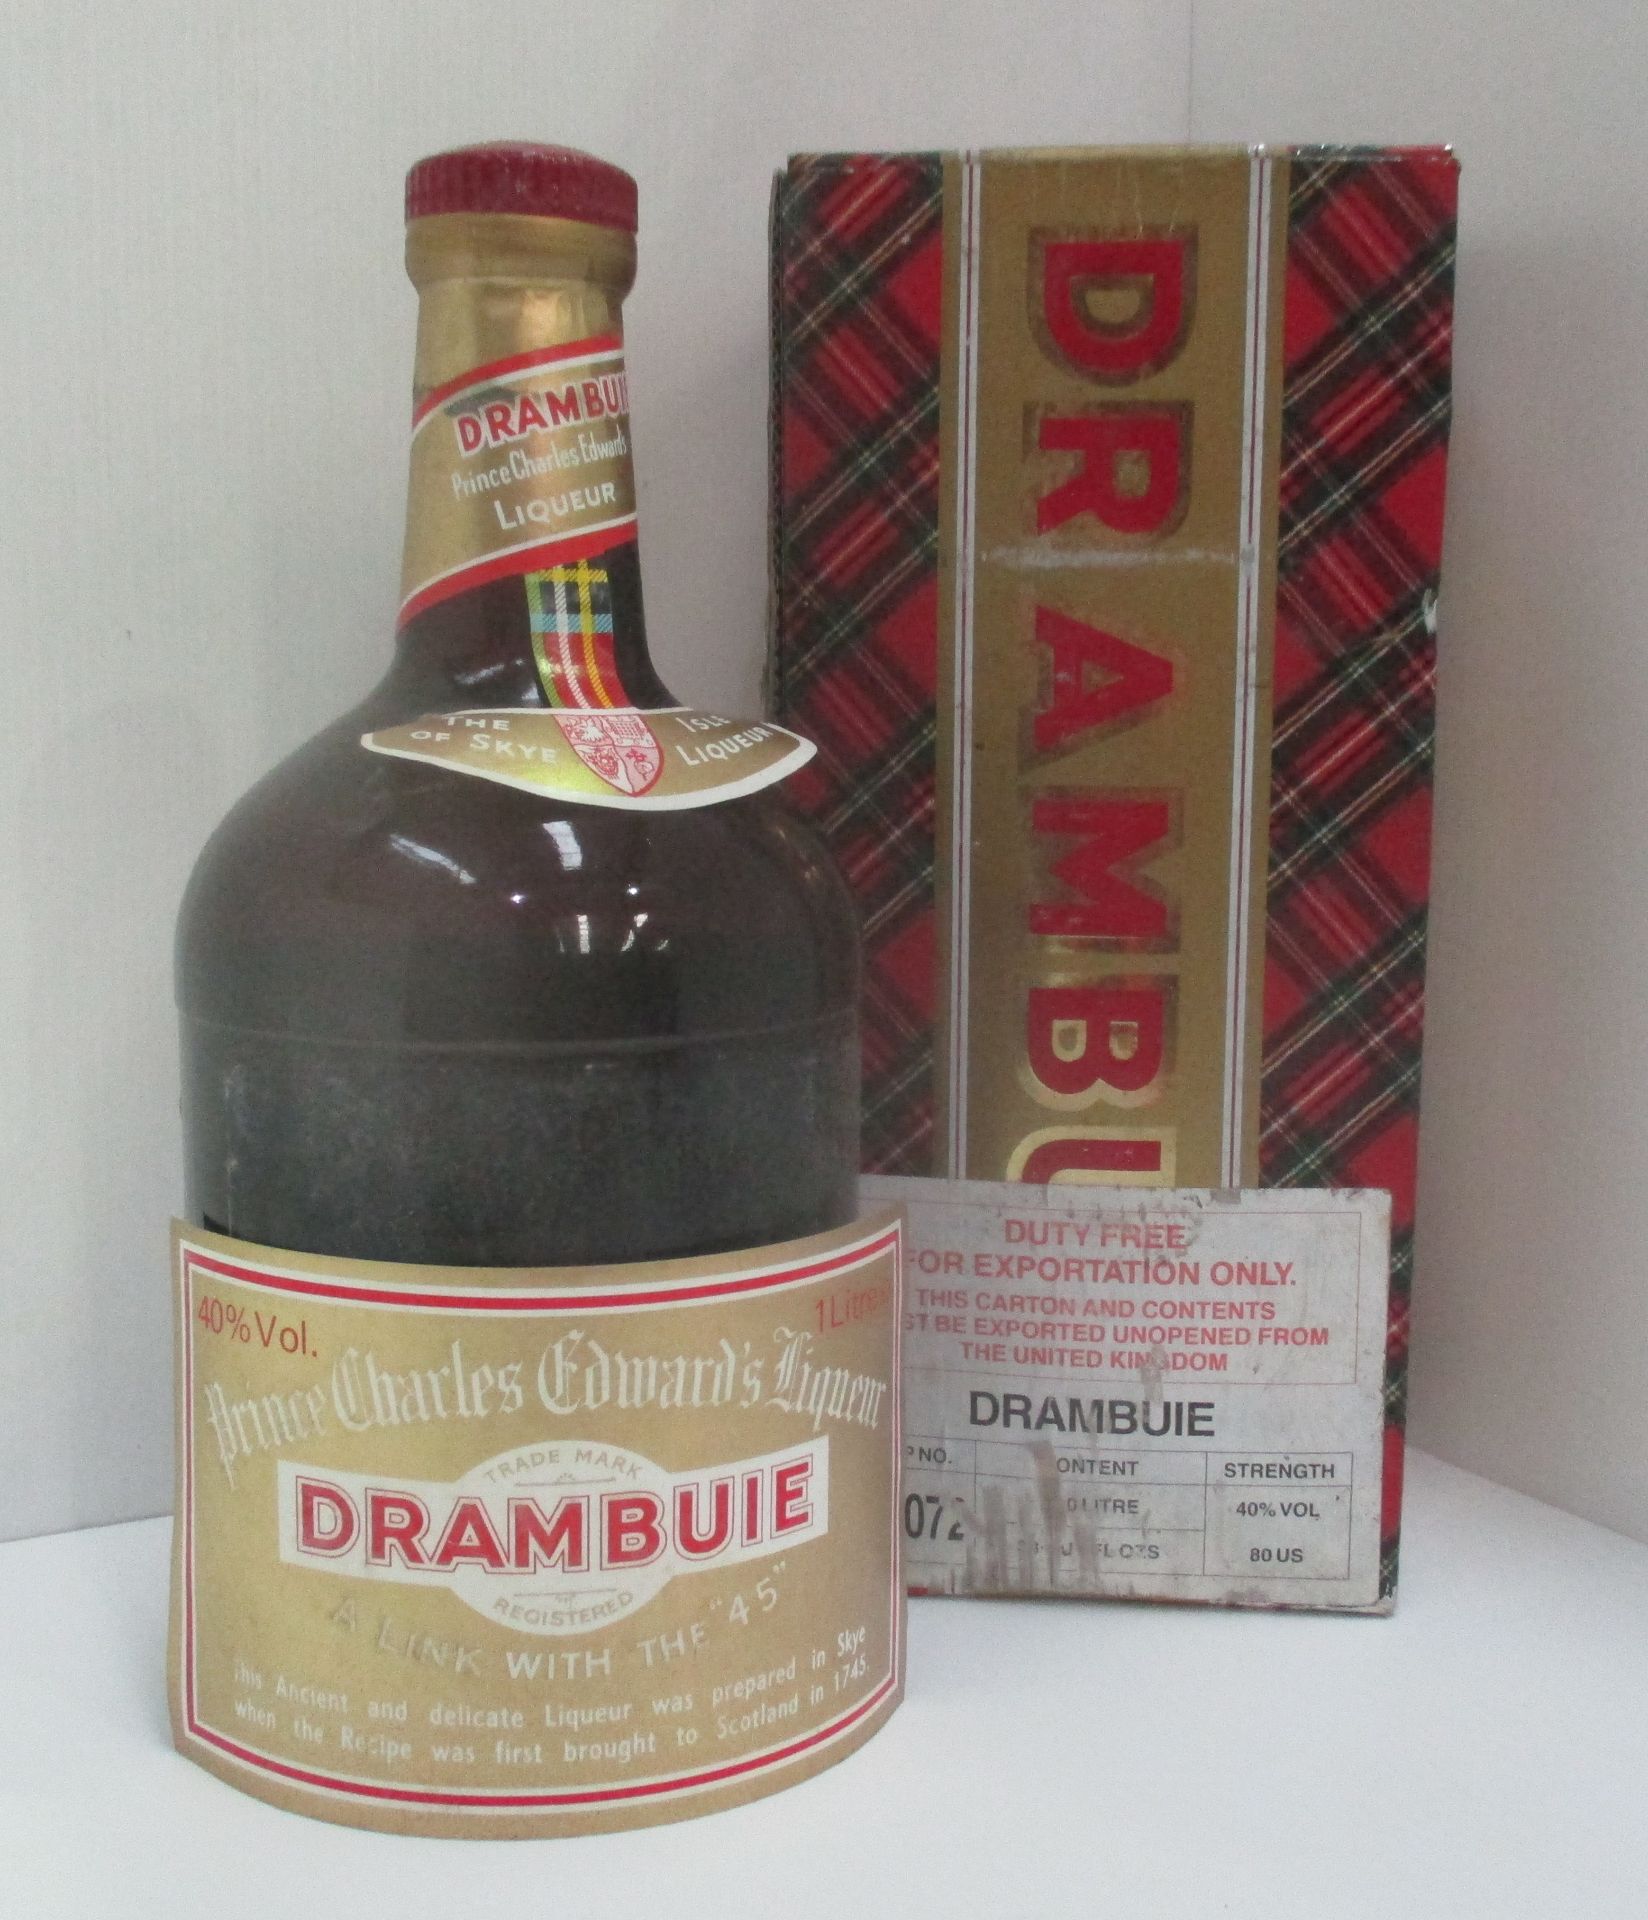 A one litre bottle of Prince Charles Edwards liqueur Drambuie in presentation box - label loose